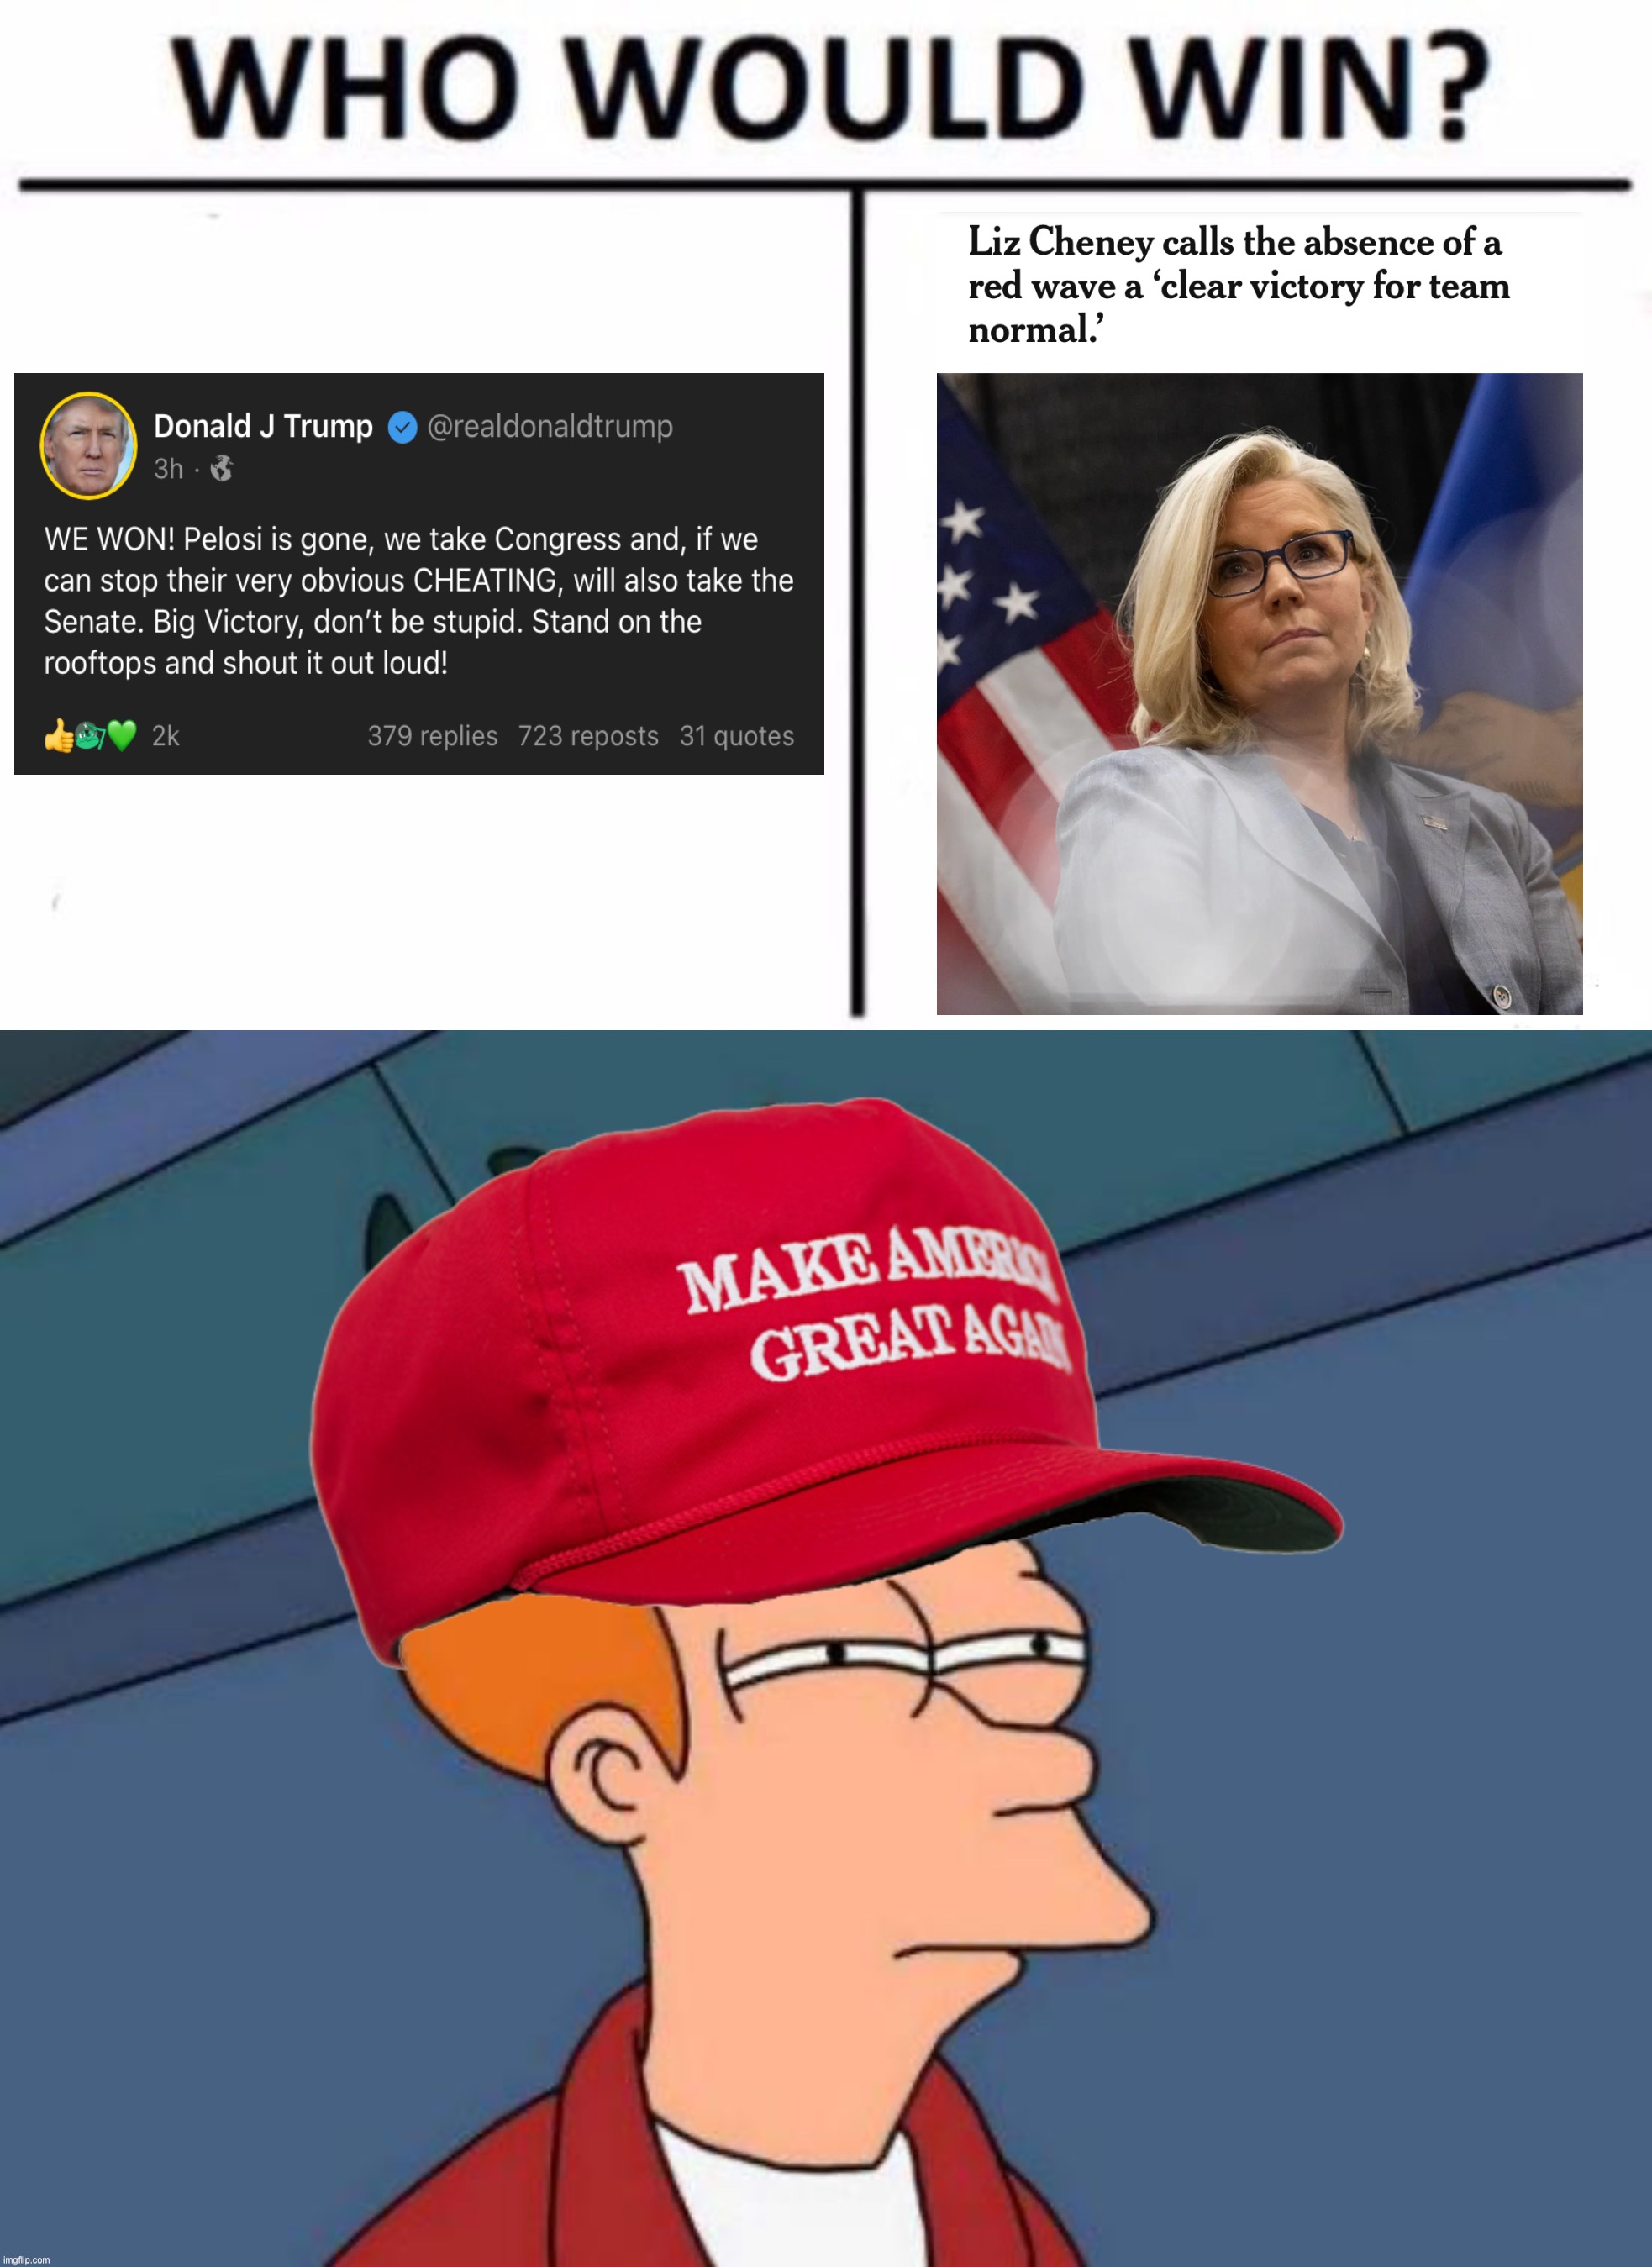 Not sure if tired of all this winning yet | image tagged in memes,who would win,maga futurama fry,2022,midterms,out-of-place futurama fry | made w/ Imgflip meme maker